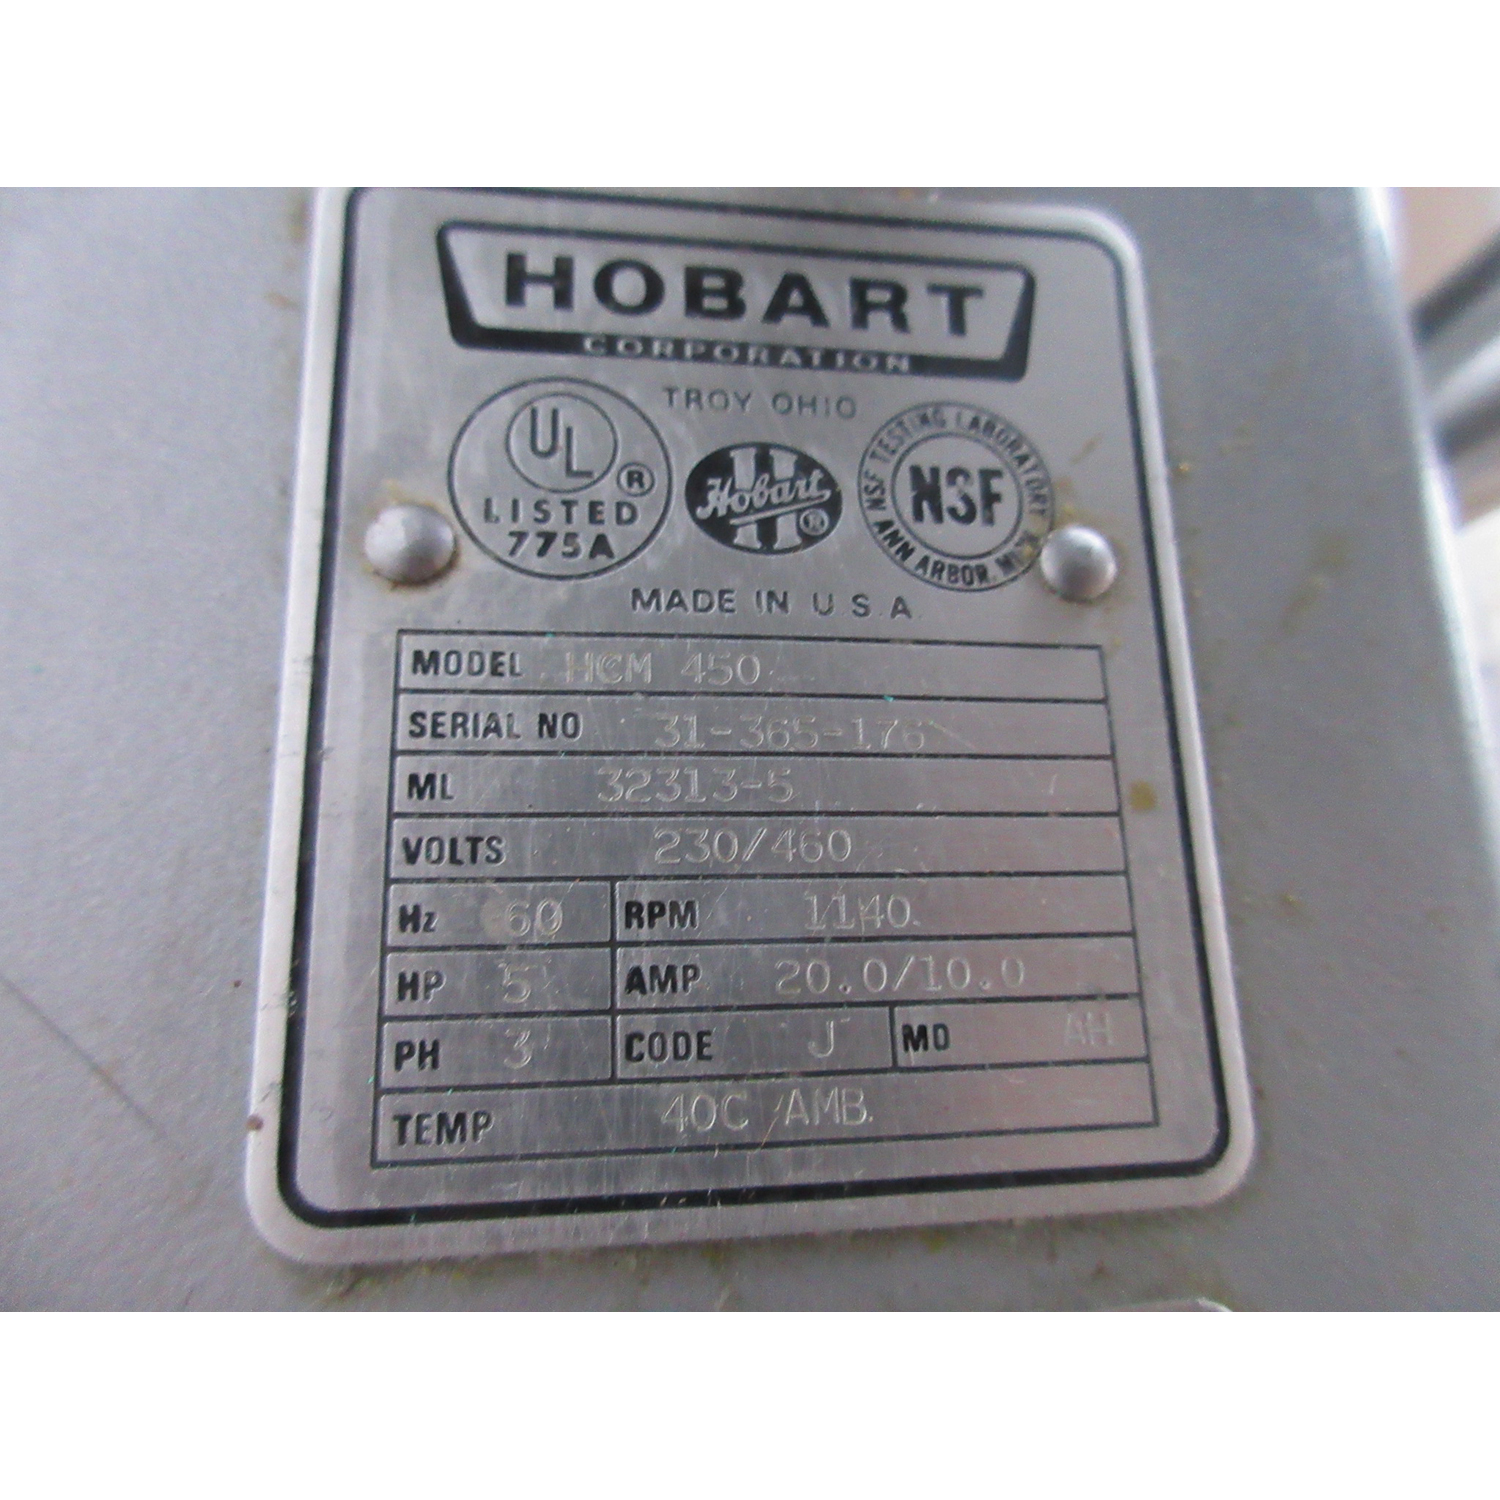 Hobart HCM-450 Cutter Mixer 45 Qt, Used Excellent Condition image 4